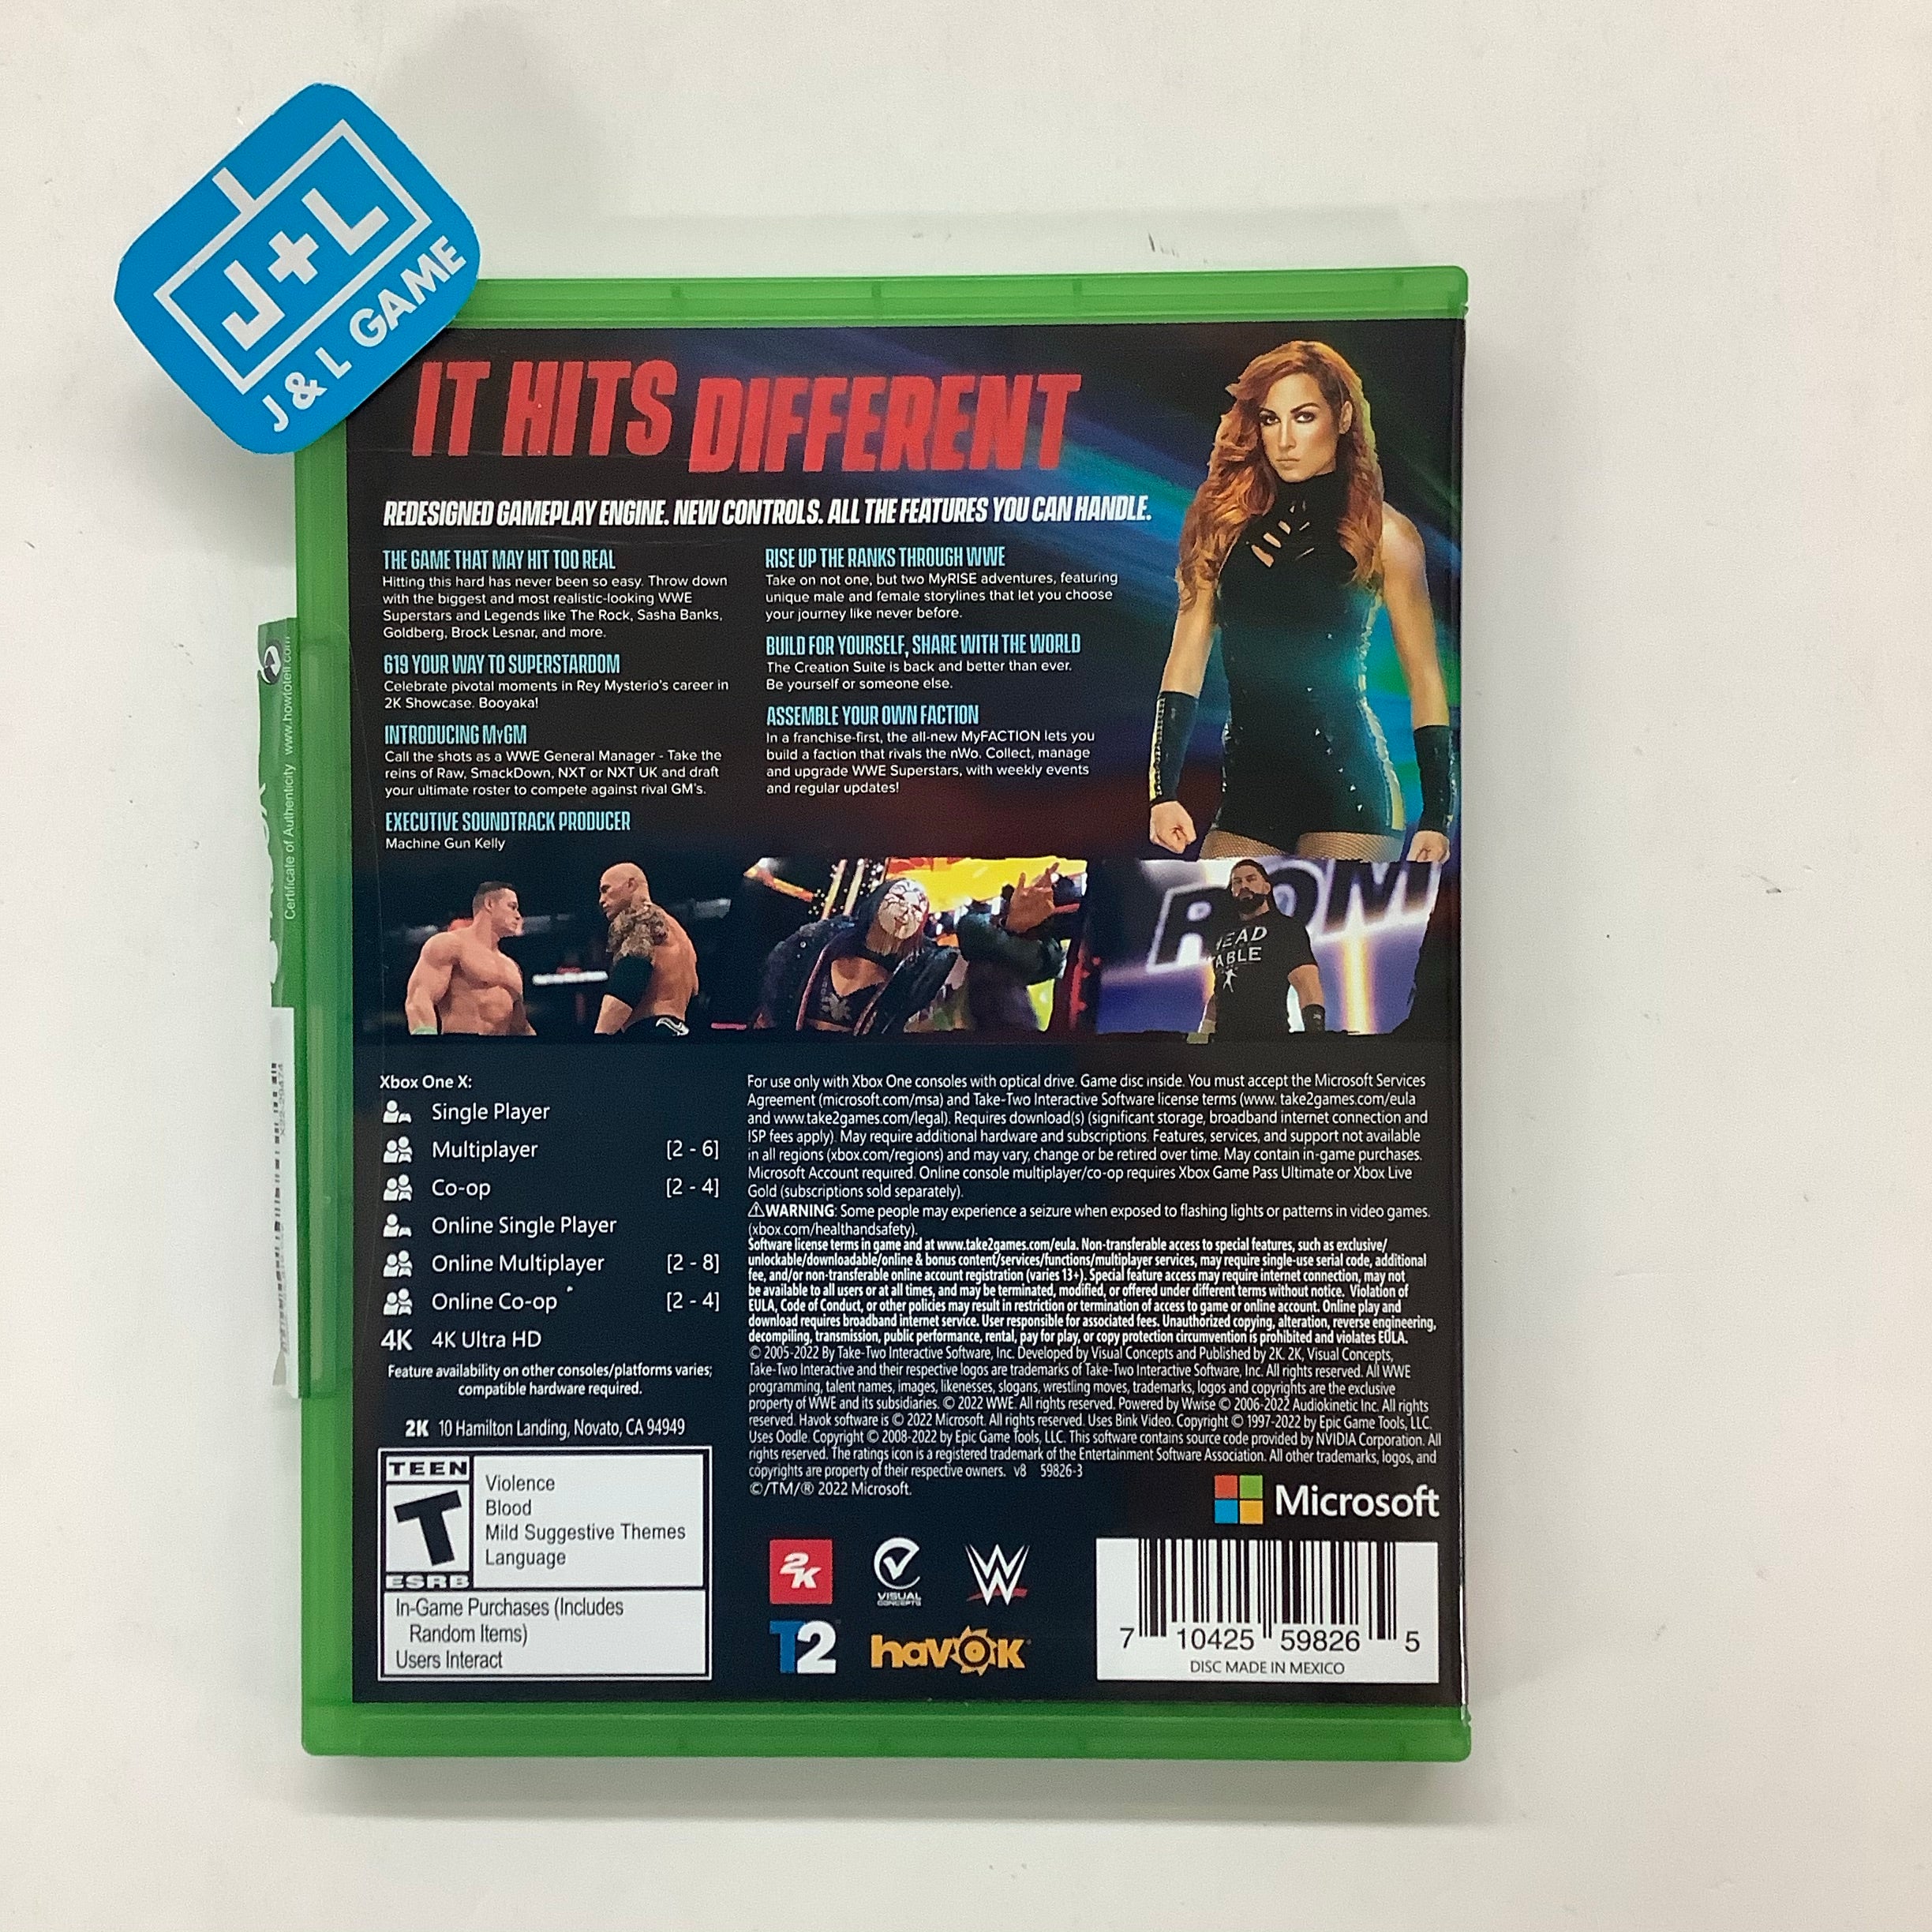 WWE 2K22 - (XB1) Xbox One [UNBOXING] Video Games 2K   